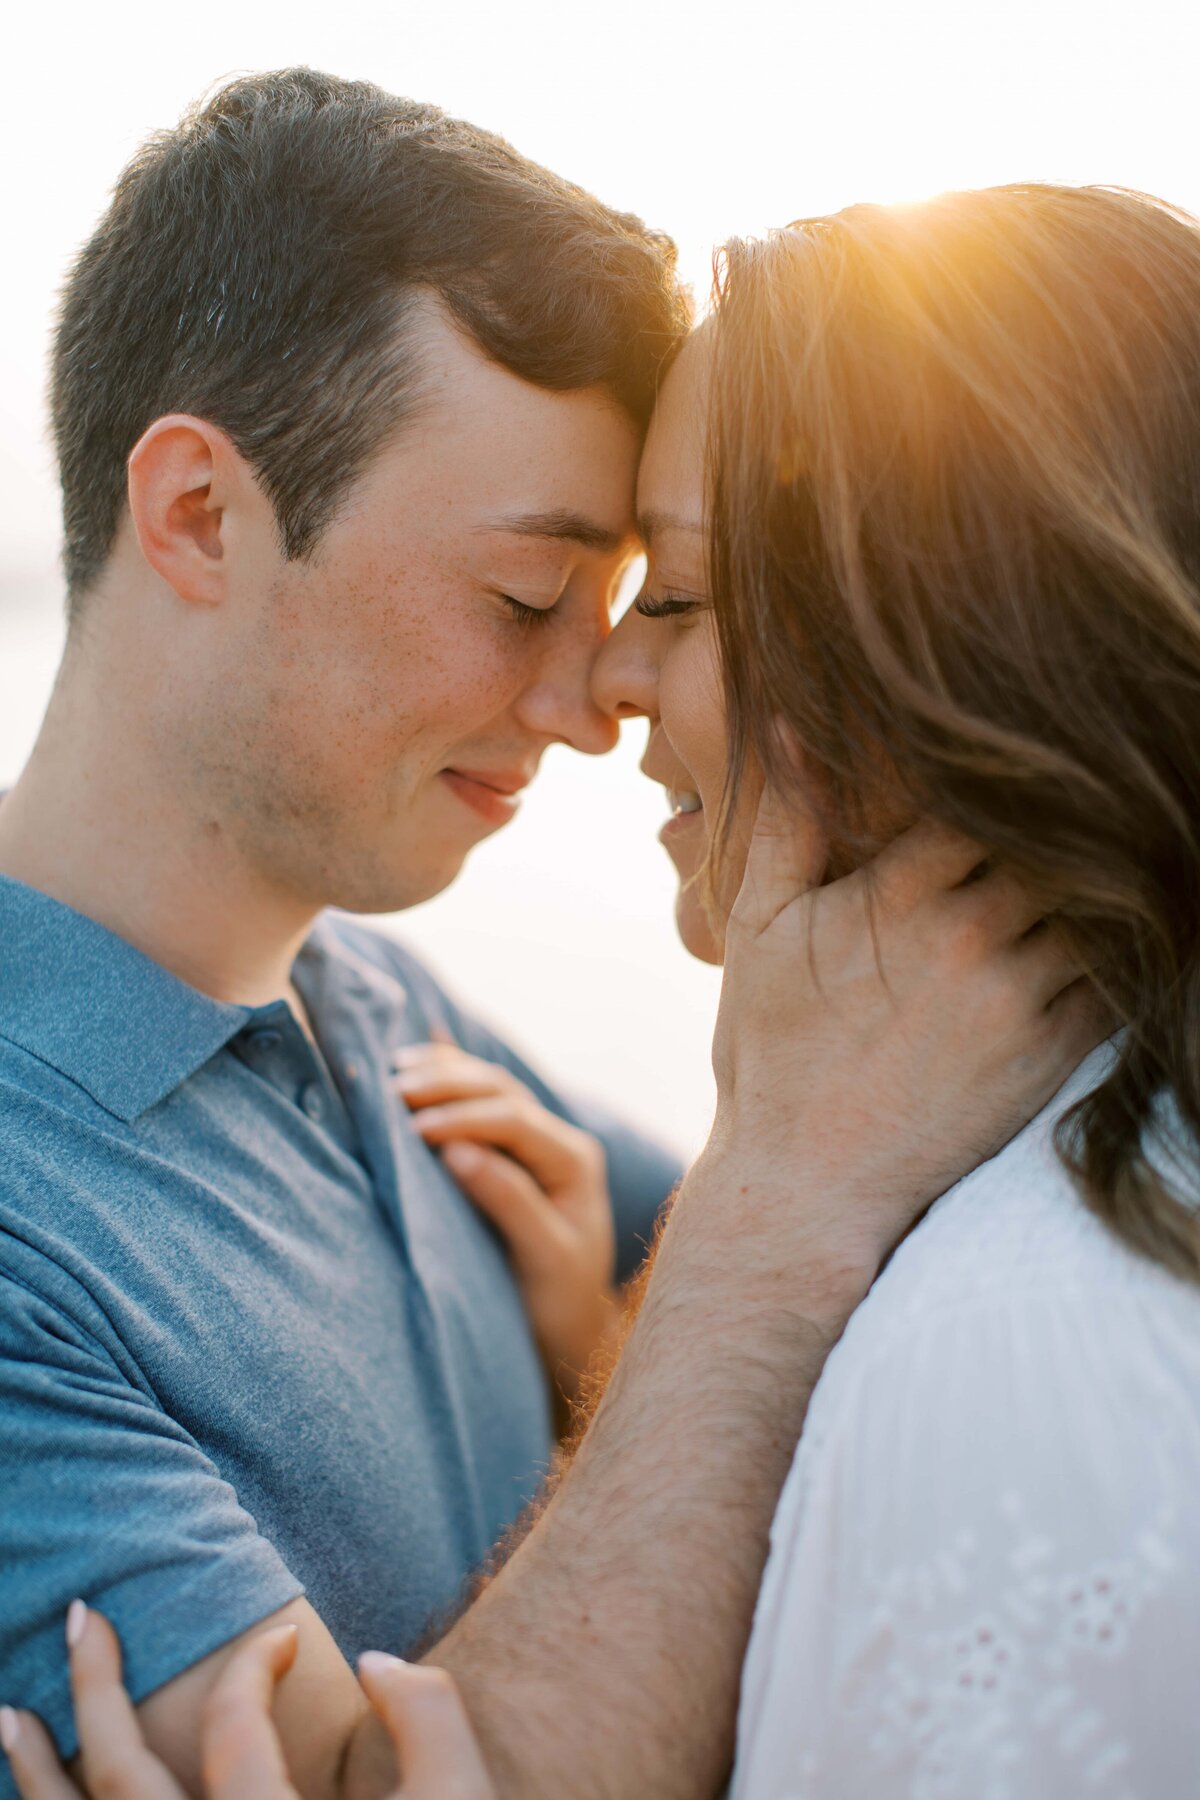 Man and woman touching foreheads with their eyes closed with the sunlight peeking through behind them